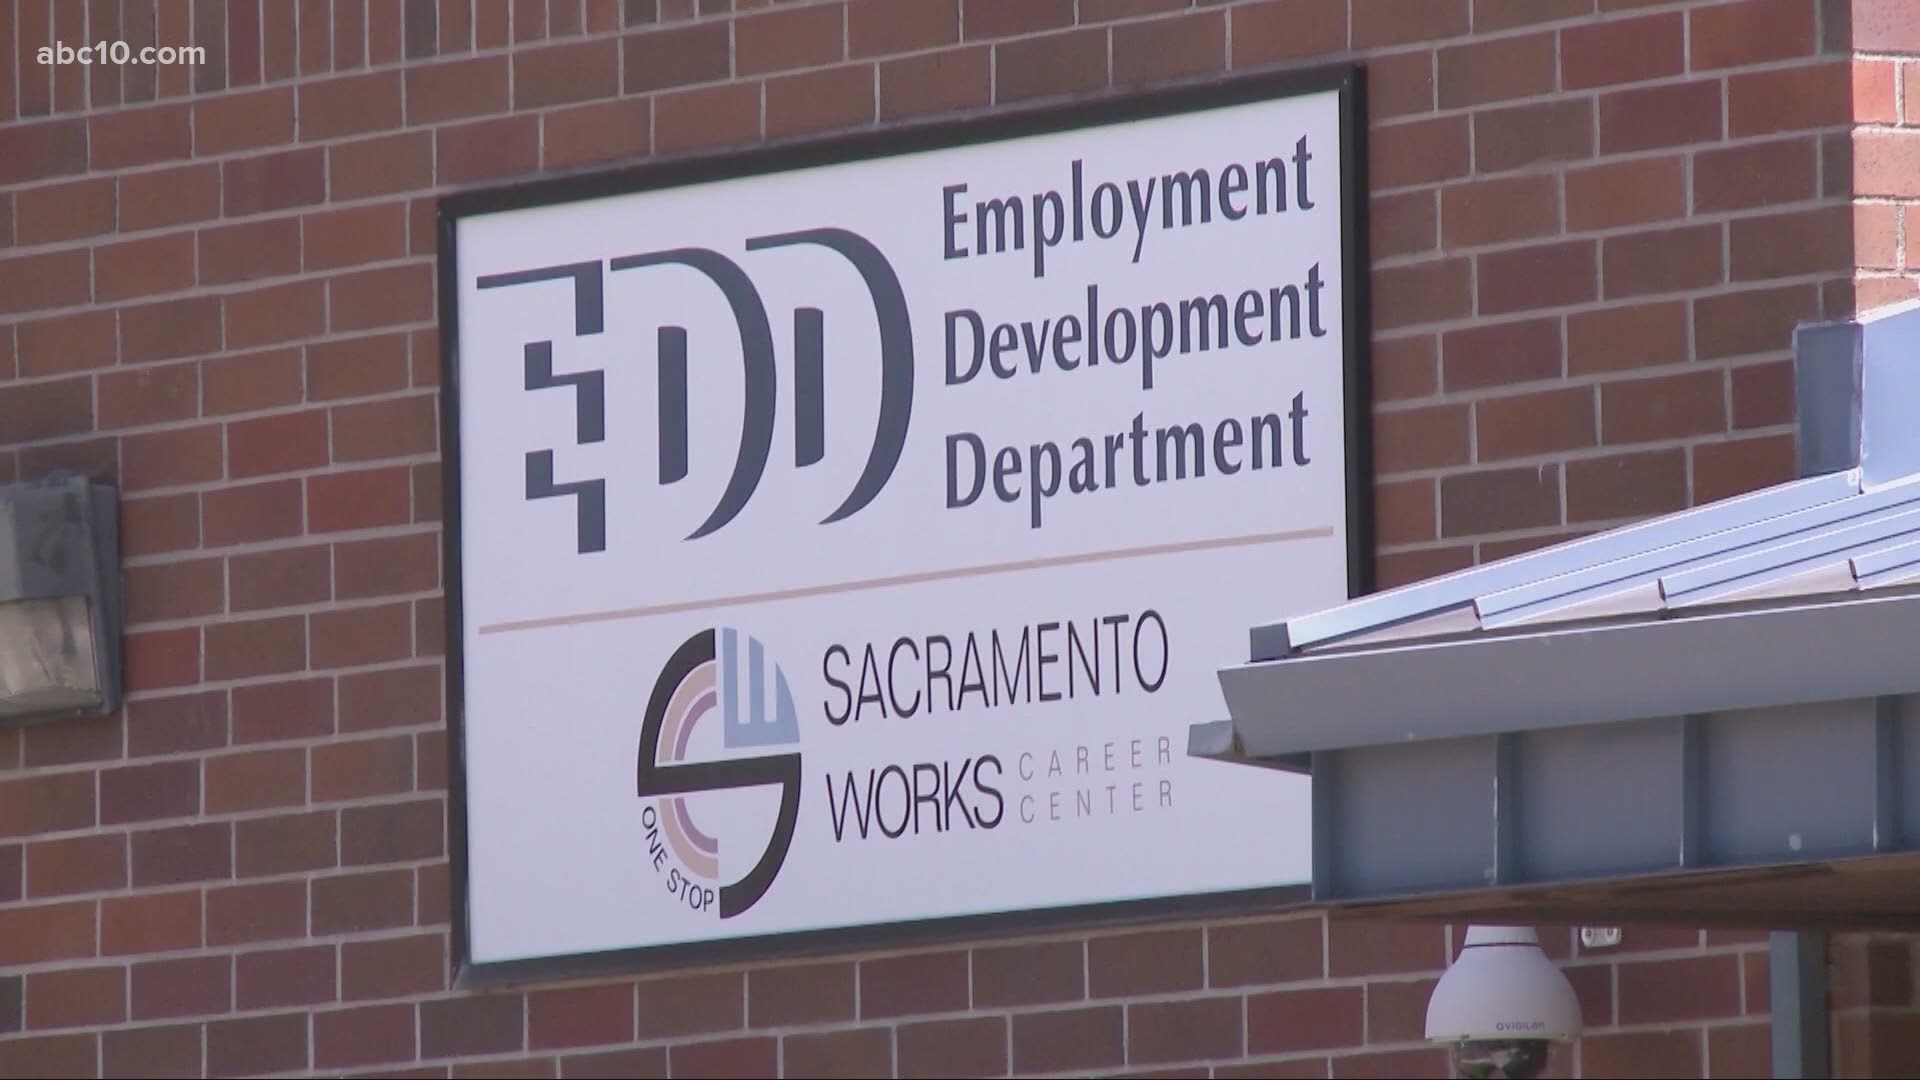 California's Employment Development Department said it will process the Lost Wages Assistance payments in two phases starting in September.